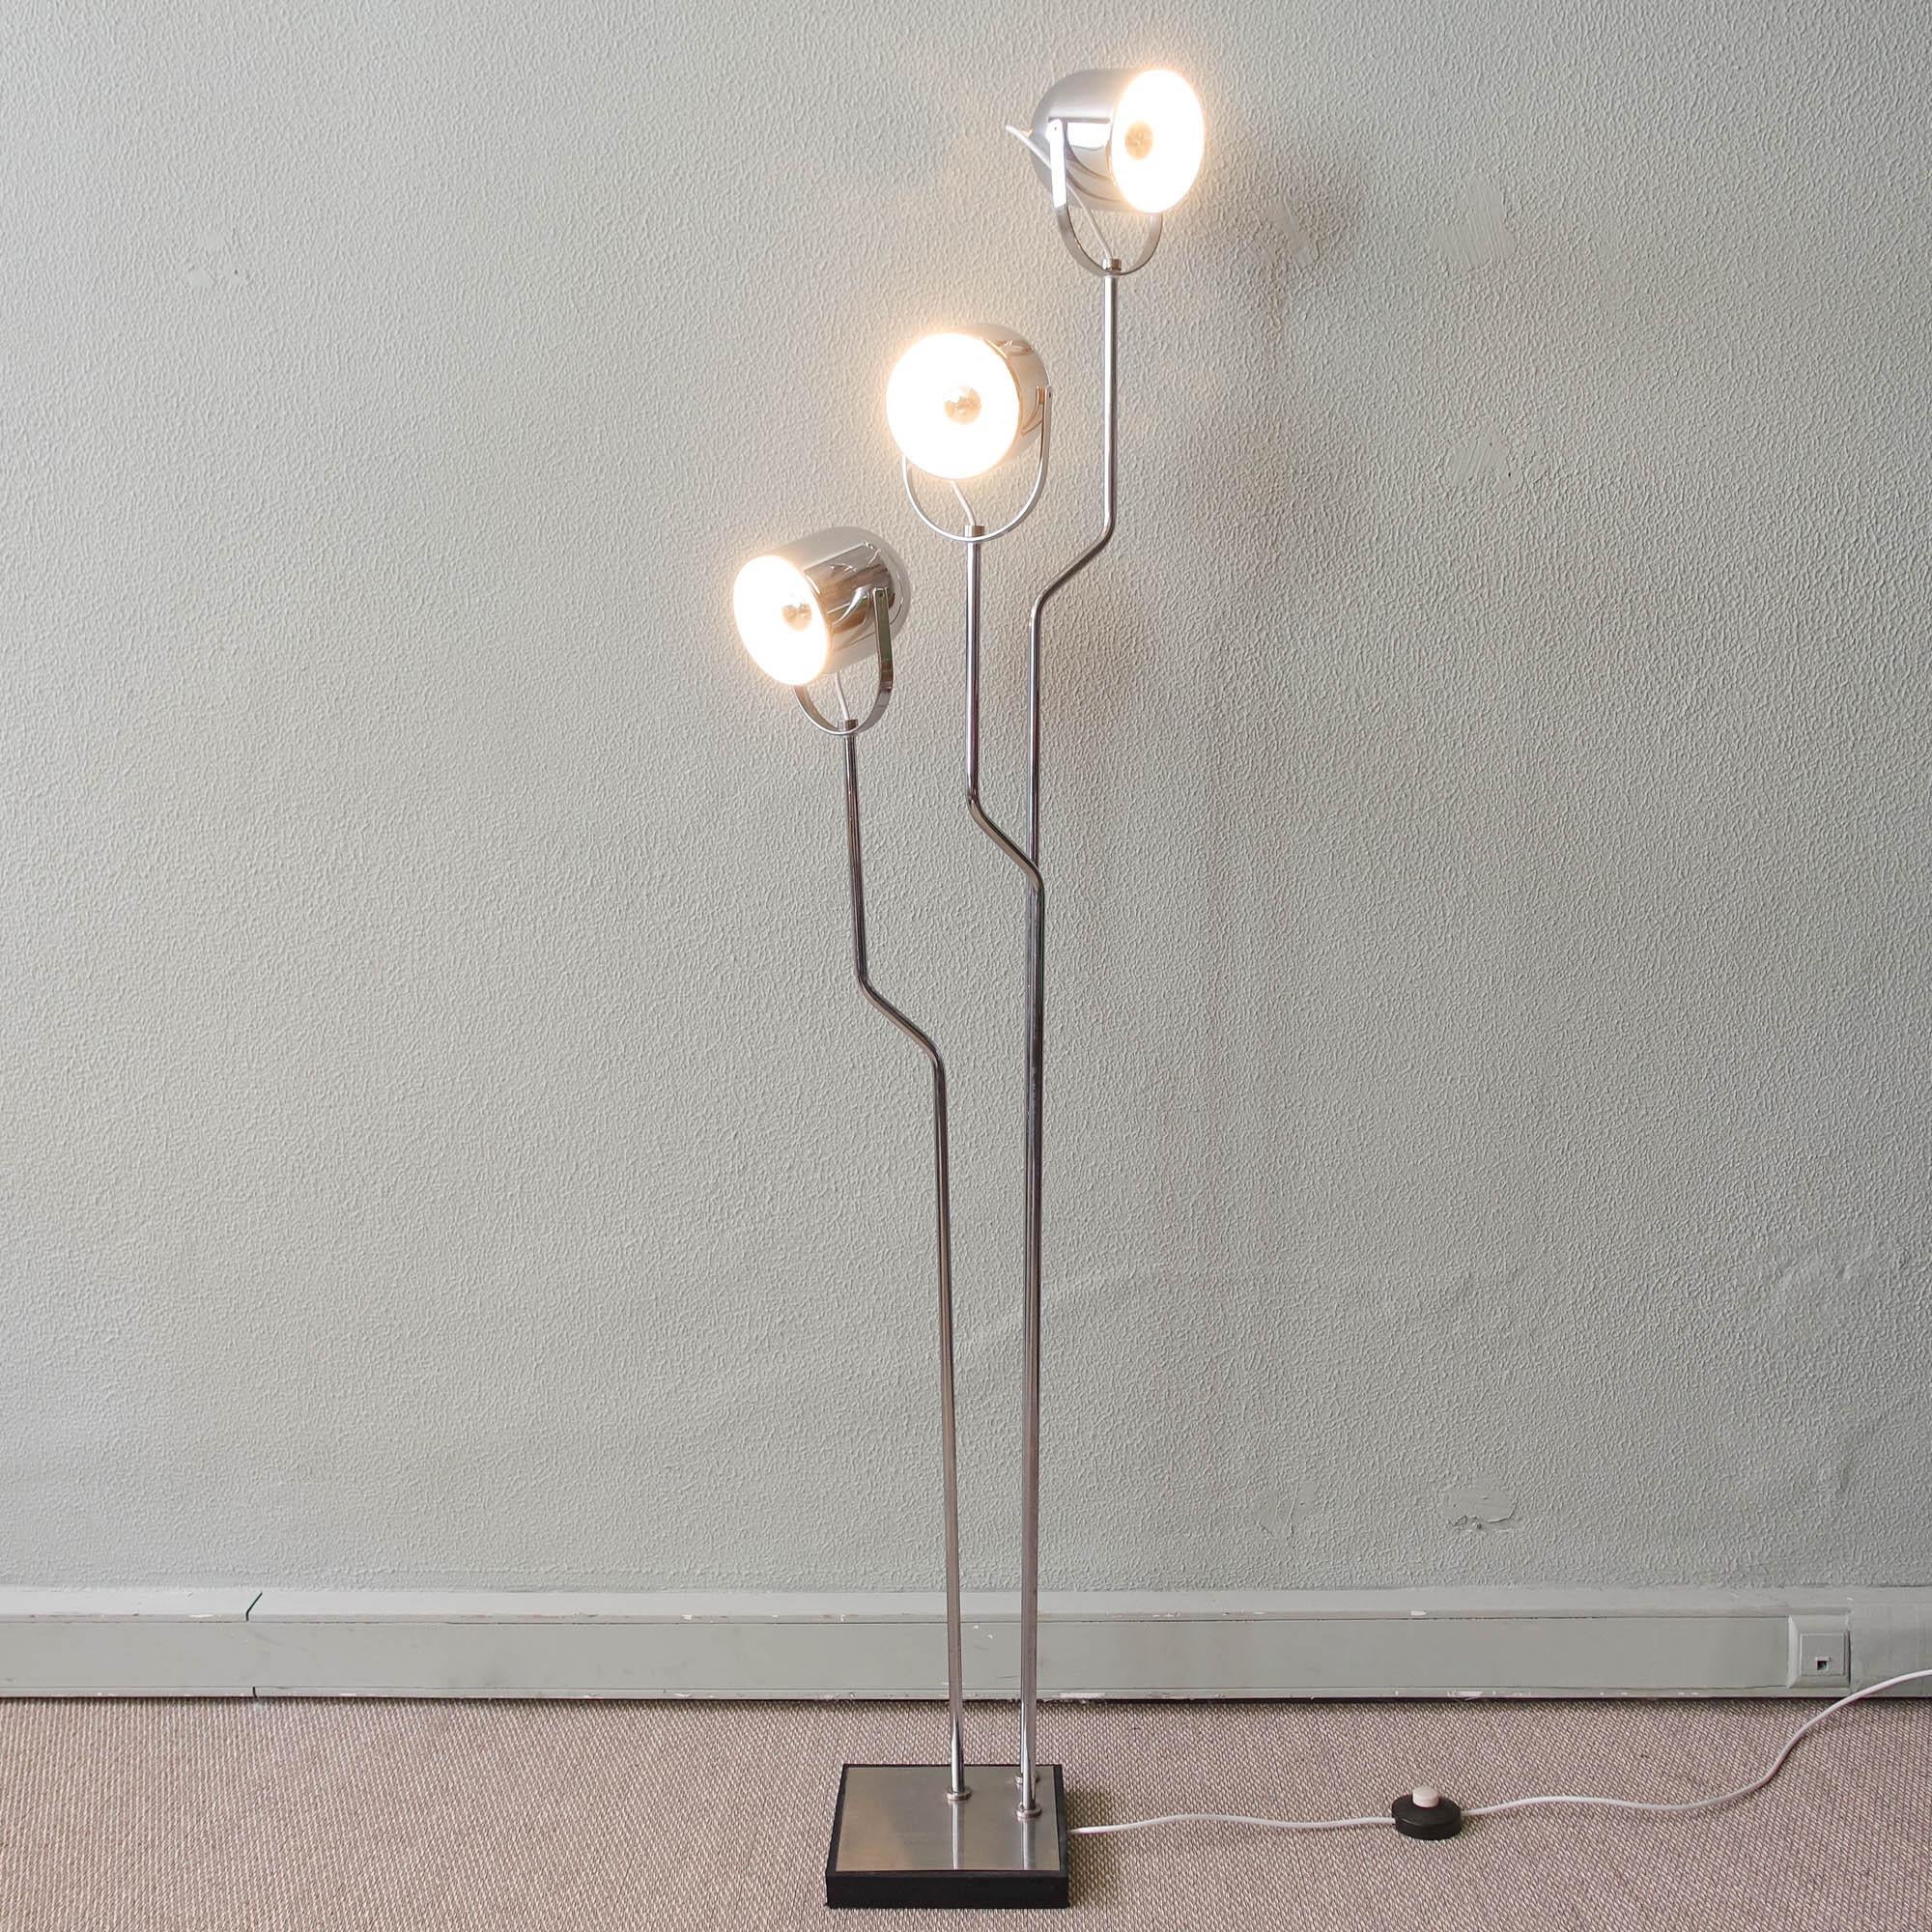 This floor lamp was designed by Goffredo Reggiani for Reggiani, in Italy, during the 1970s. It is a chromed-steel floor lamp that features three fully adjustable fixtures affixed to a corresponding chromed-steel bent rod. The spot lights in